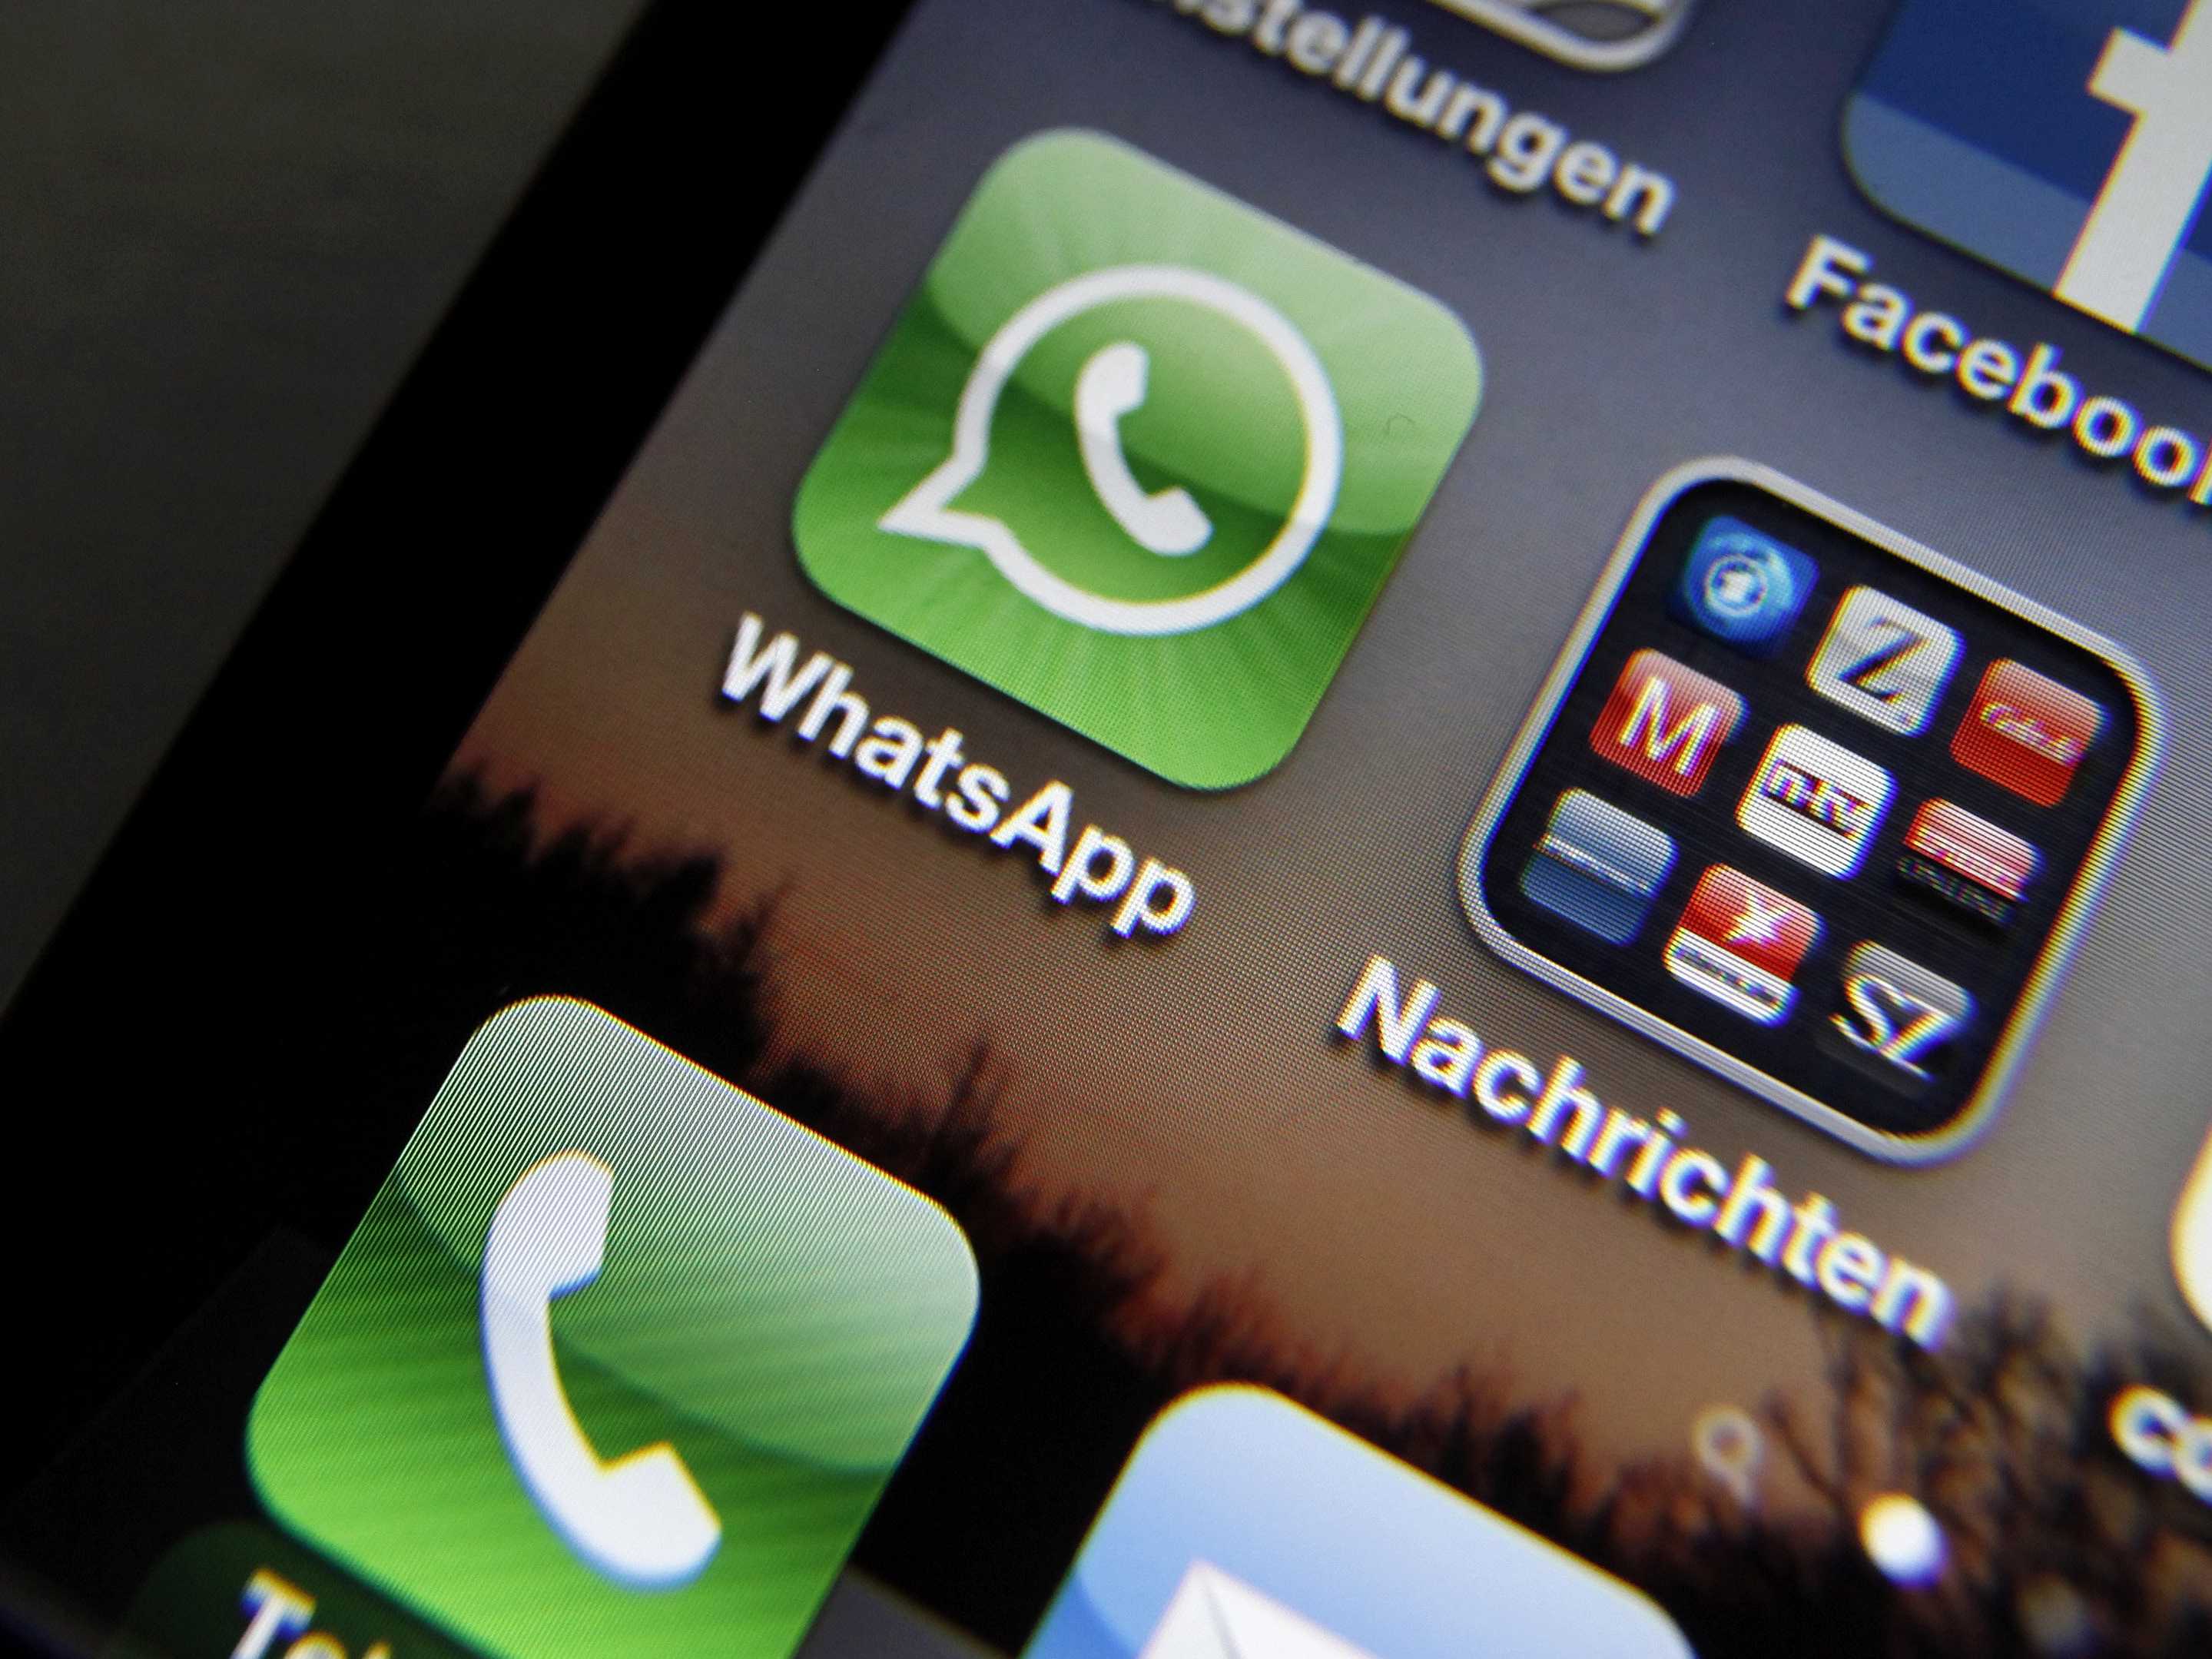 texting-app-whatsapp-now-has-400-million-people-using-it-every-month-making-it-bigger-than-twitter